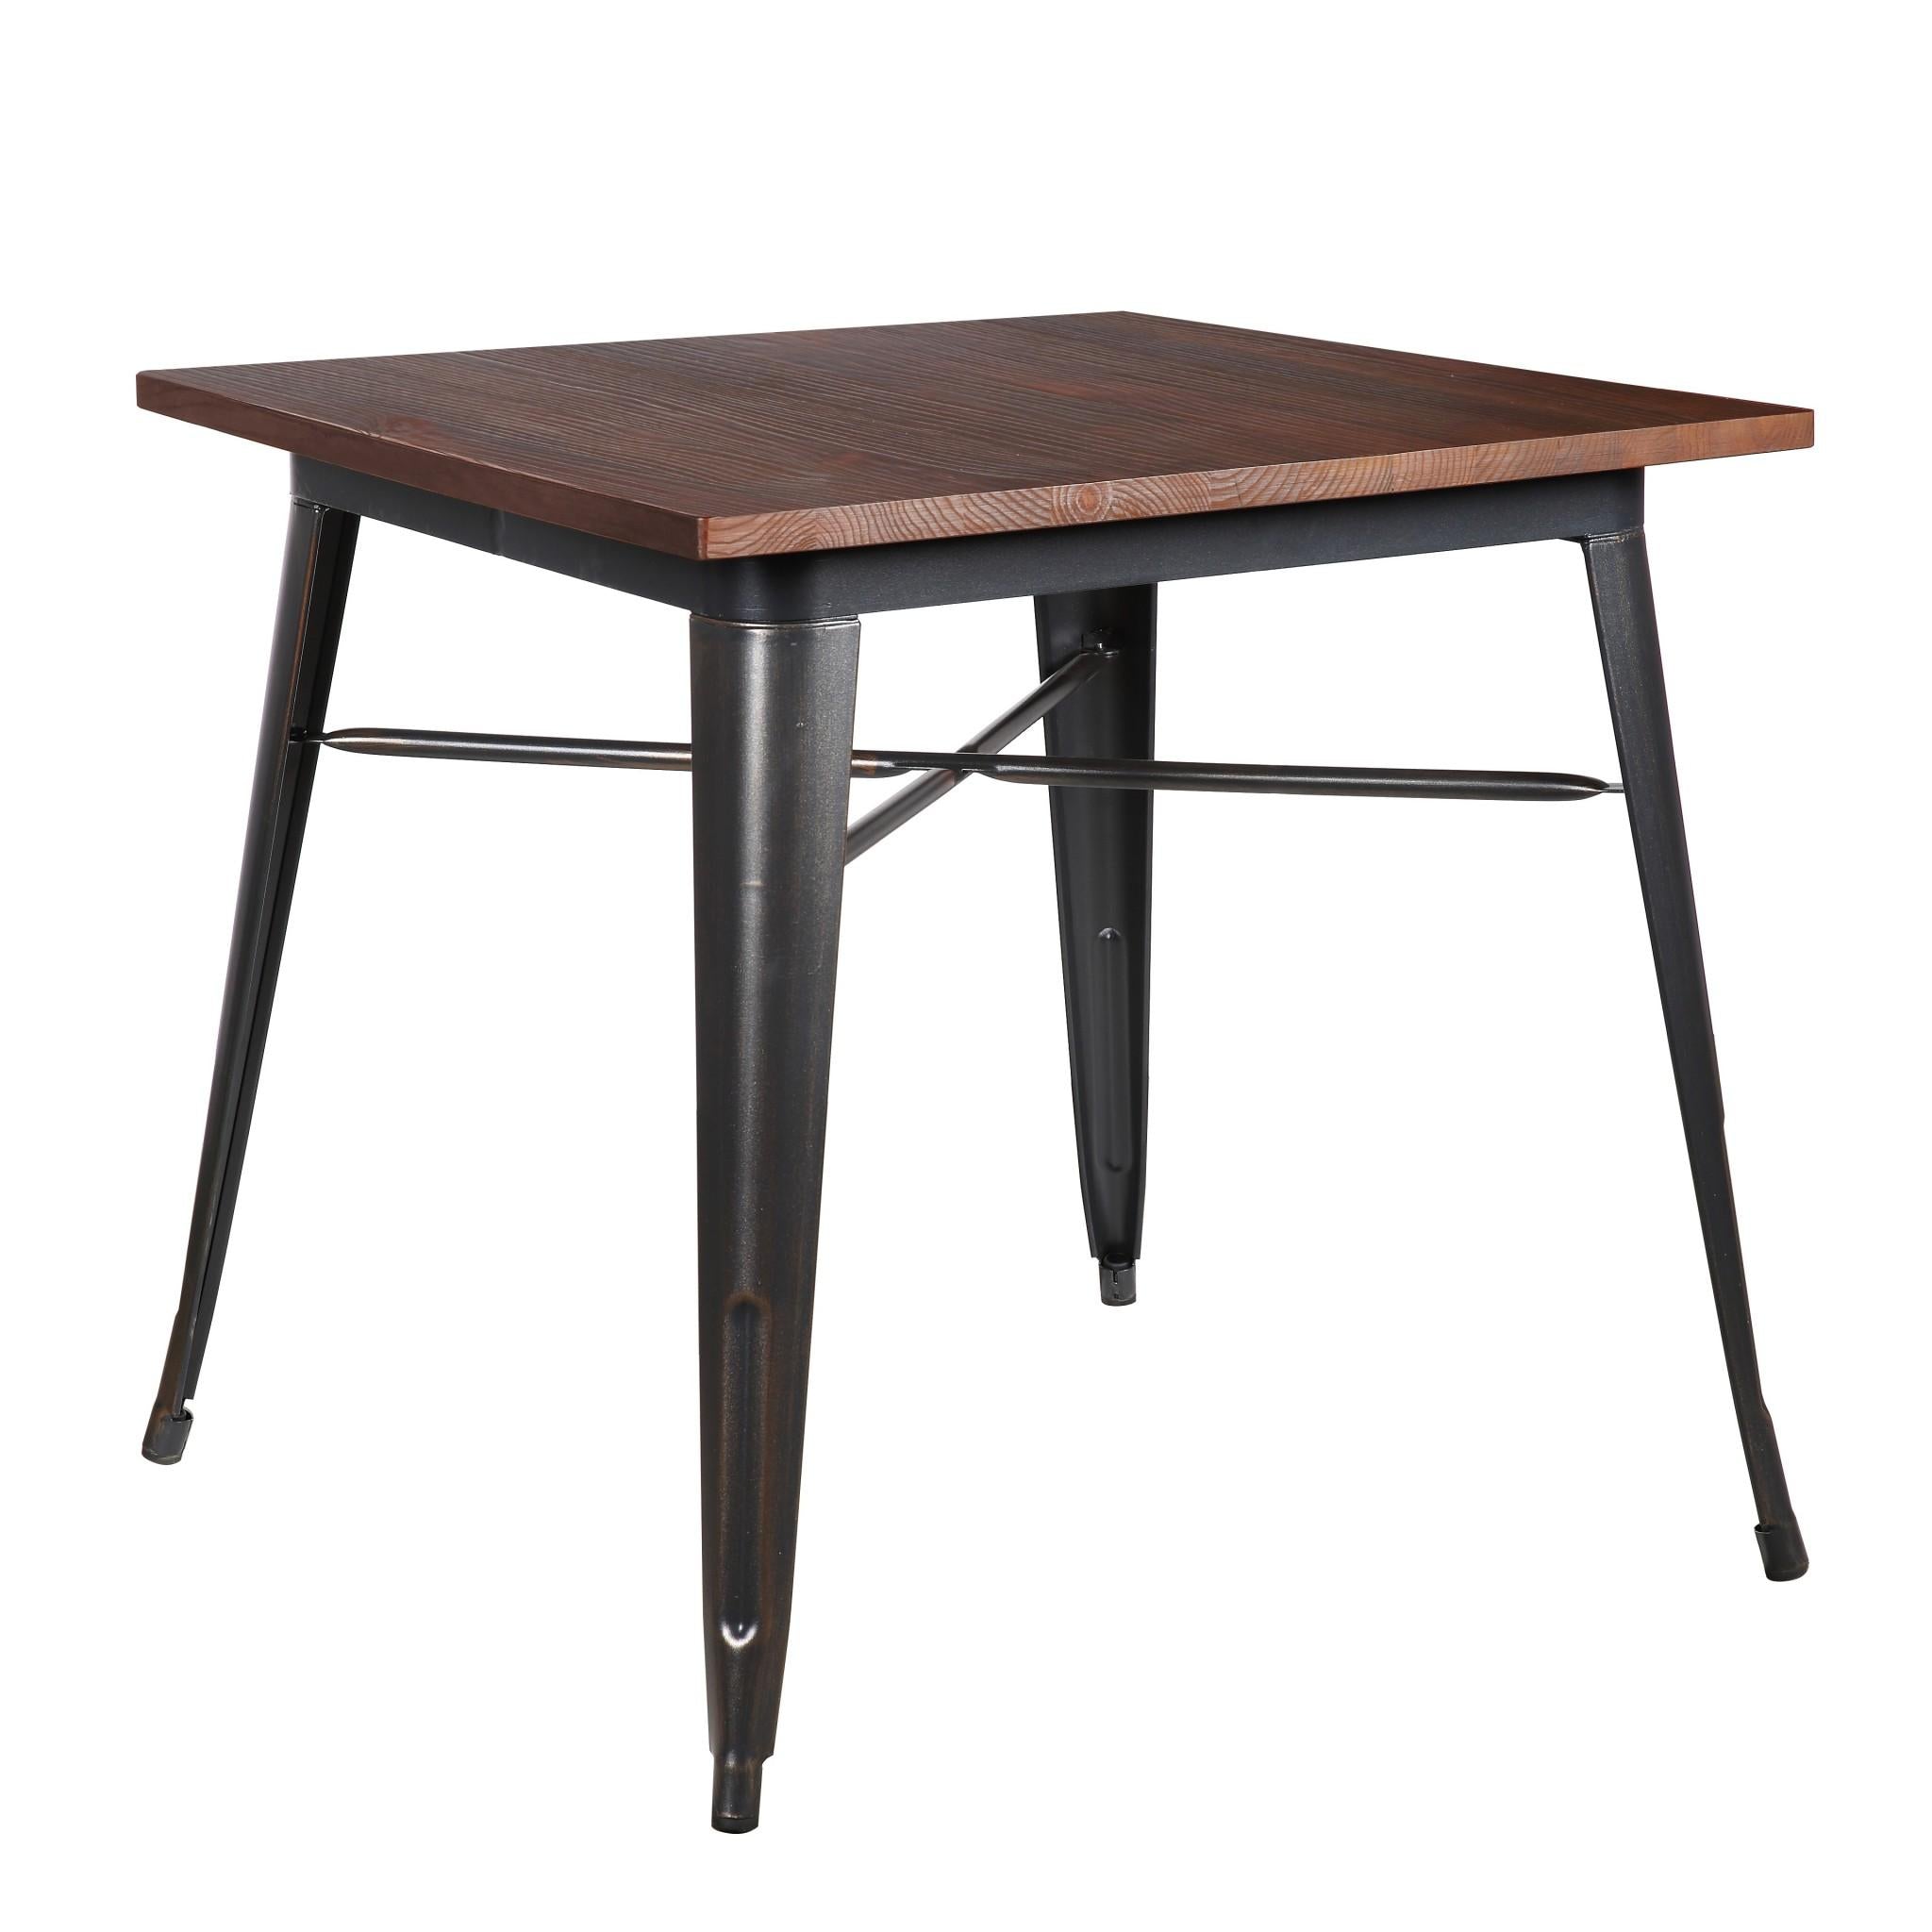 Mod Industrial Walnut and Black Square Dining Table